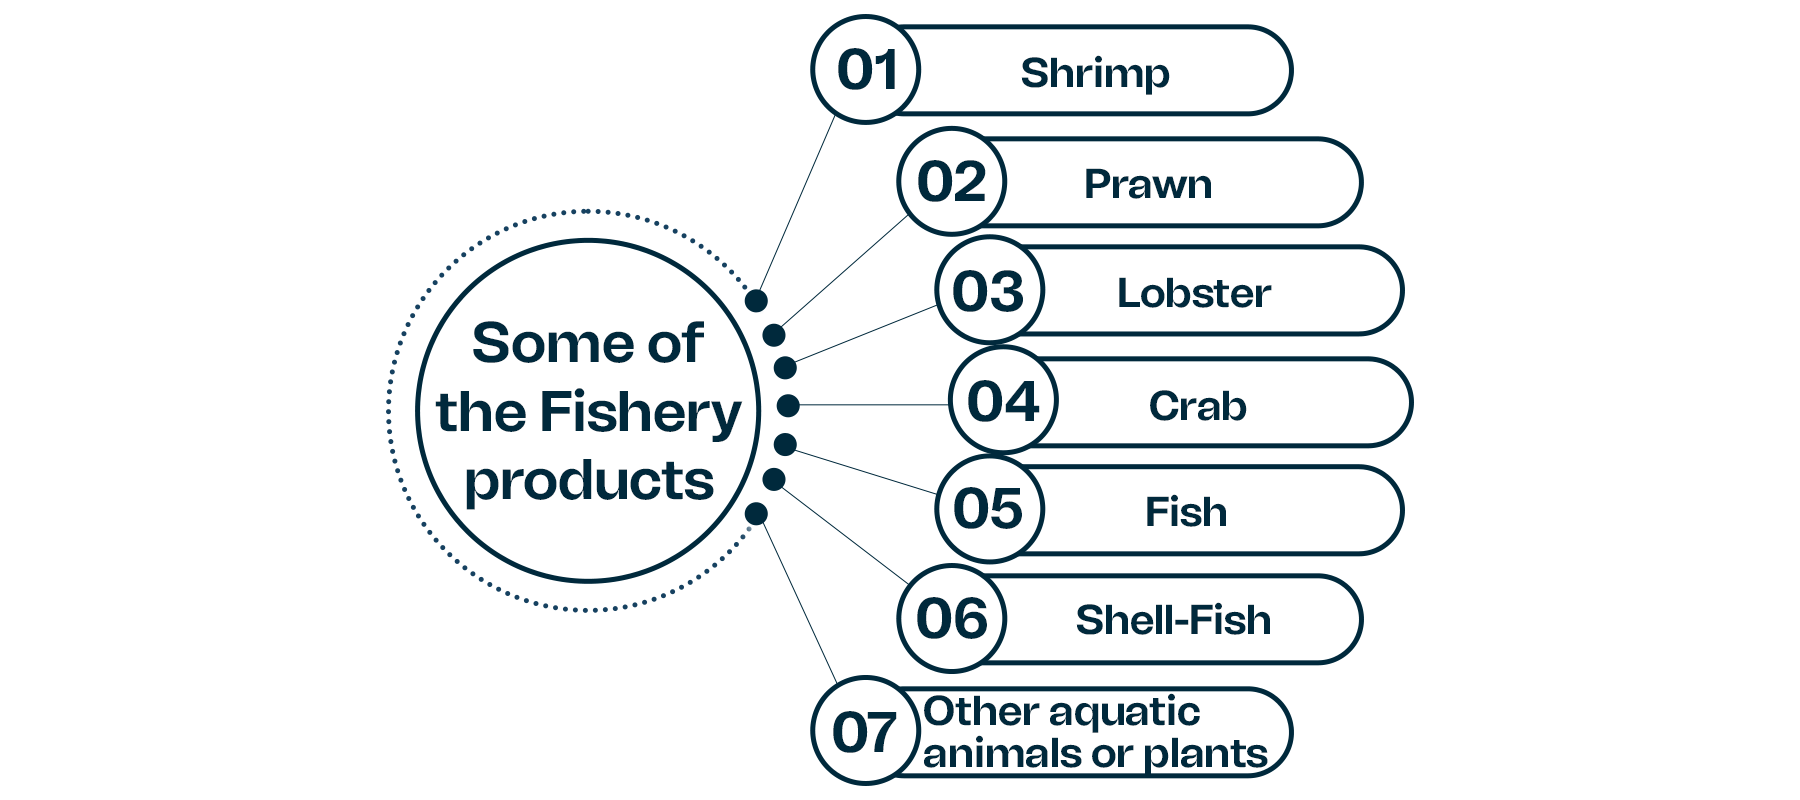 List of marine products